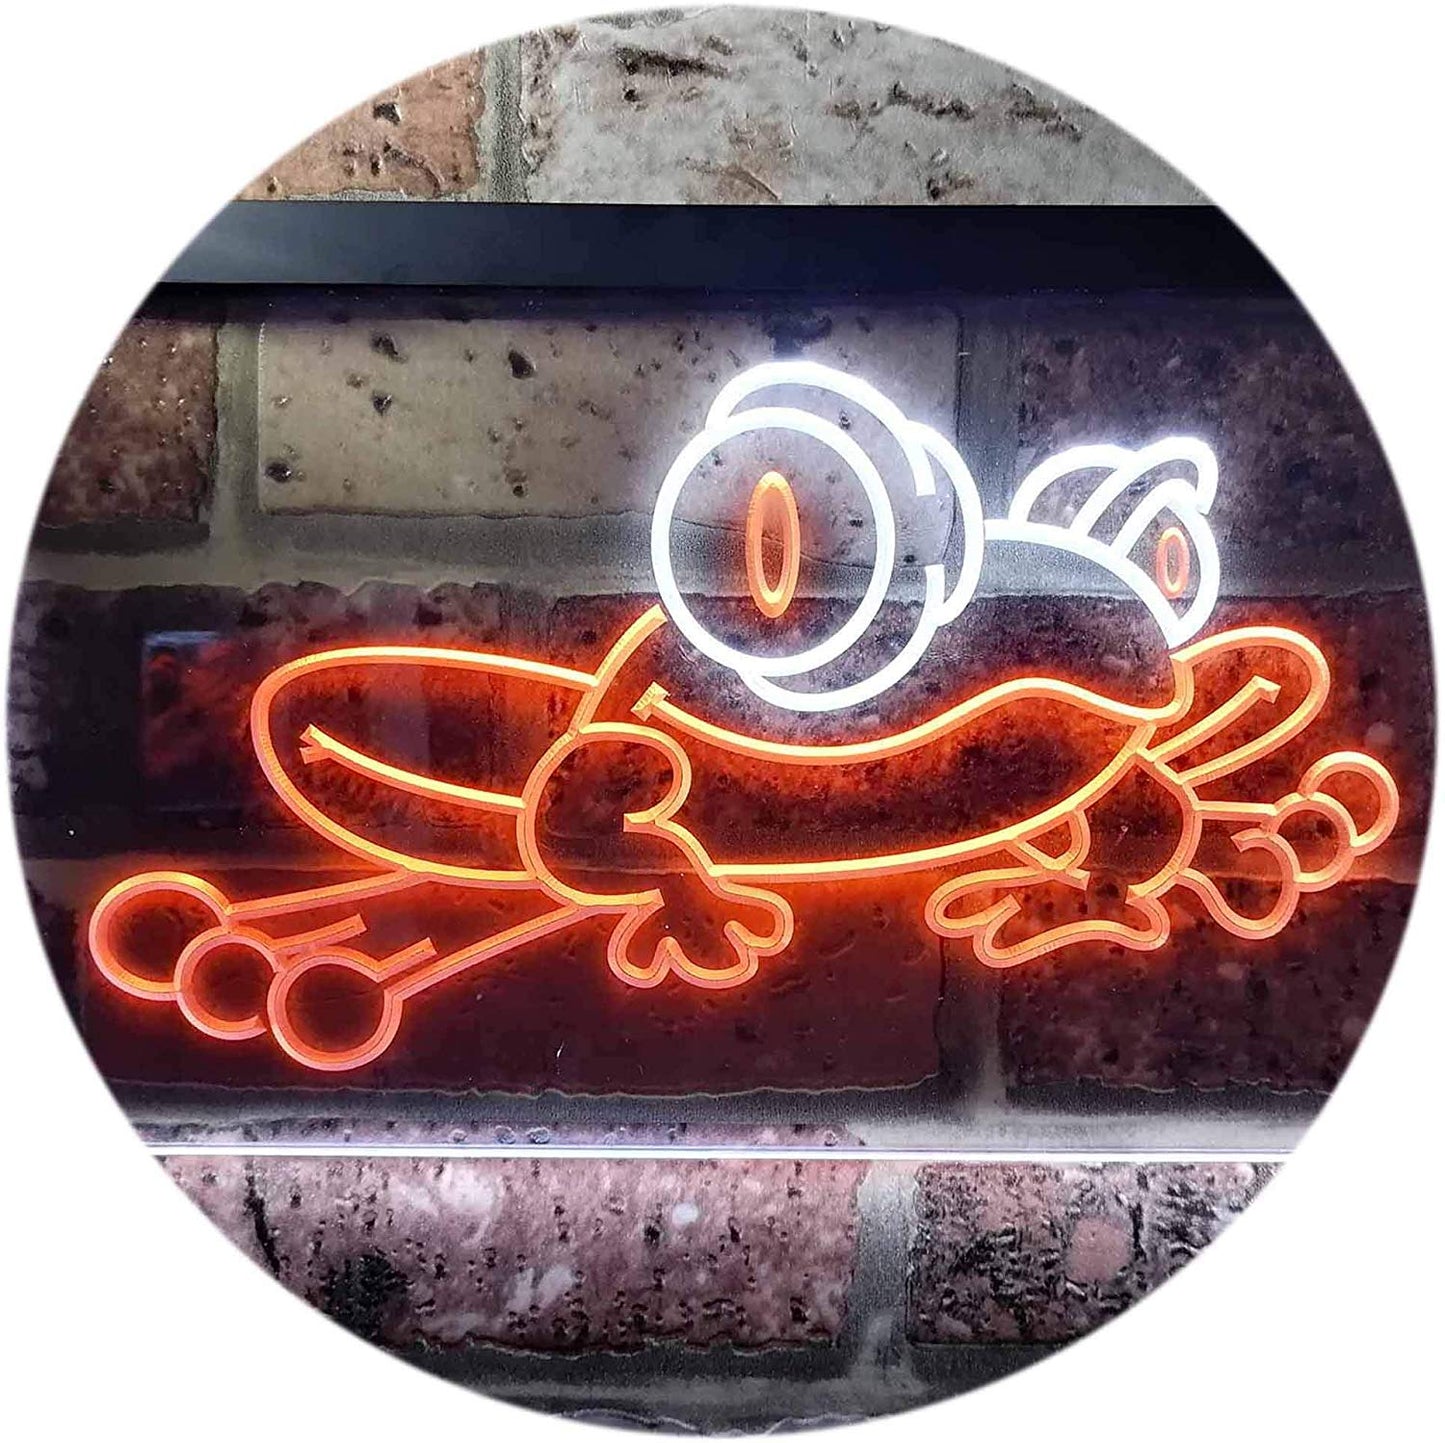 Frog LED Neon Light Sign - Way Up Gifts